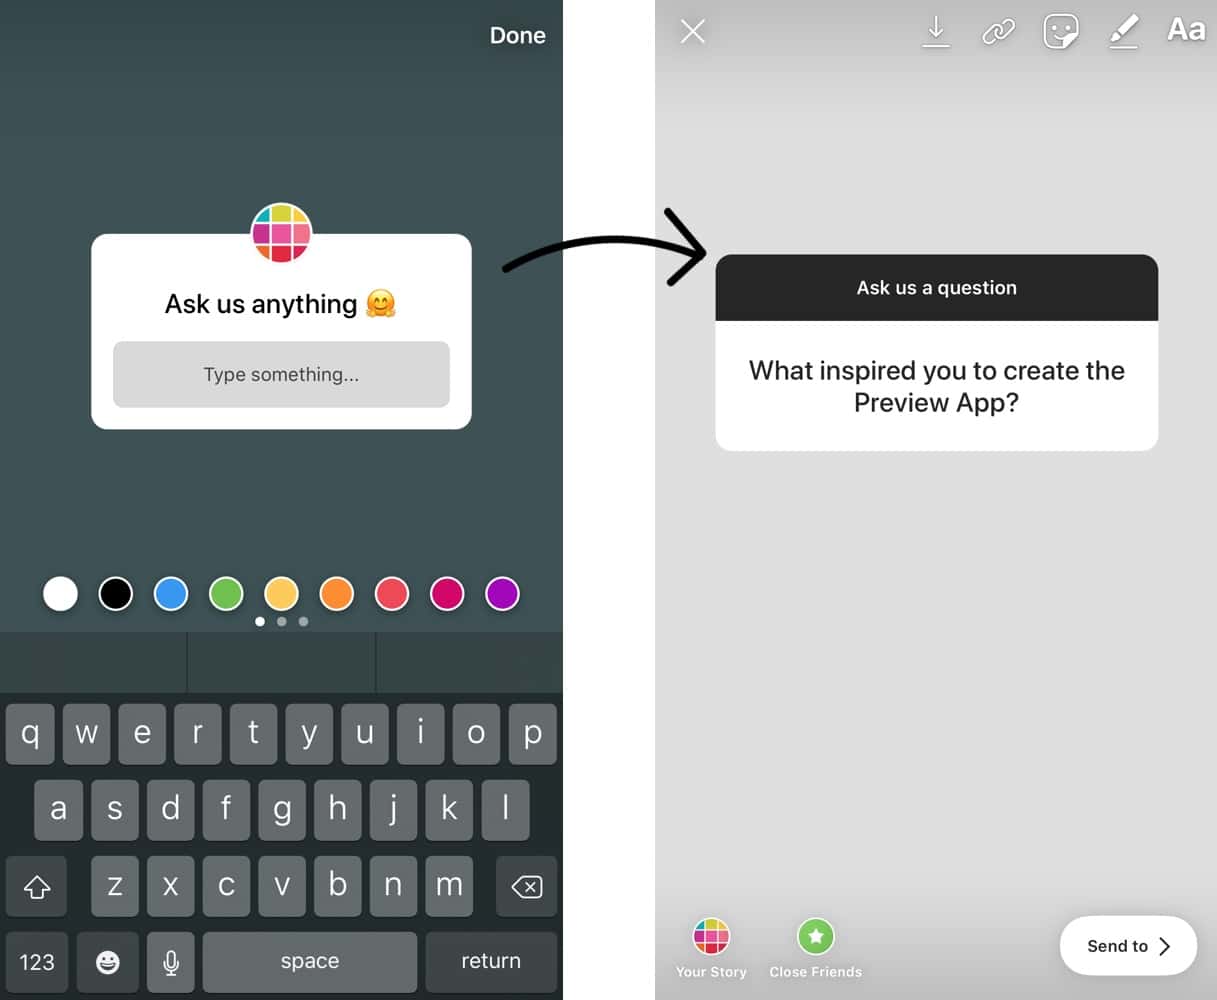 How To Use Question Feature Insta Story 6 